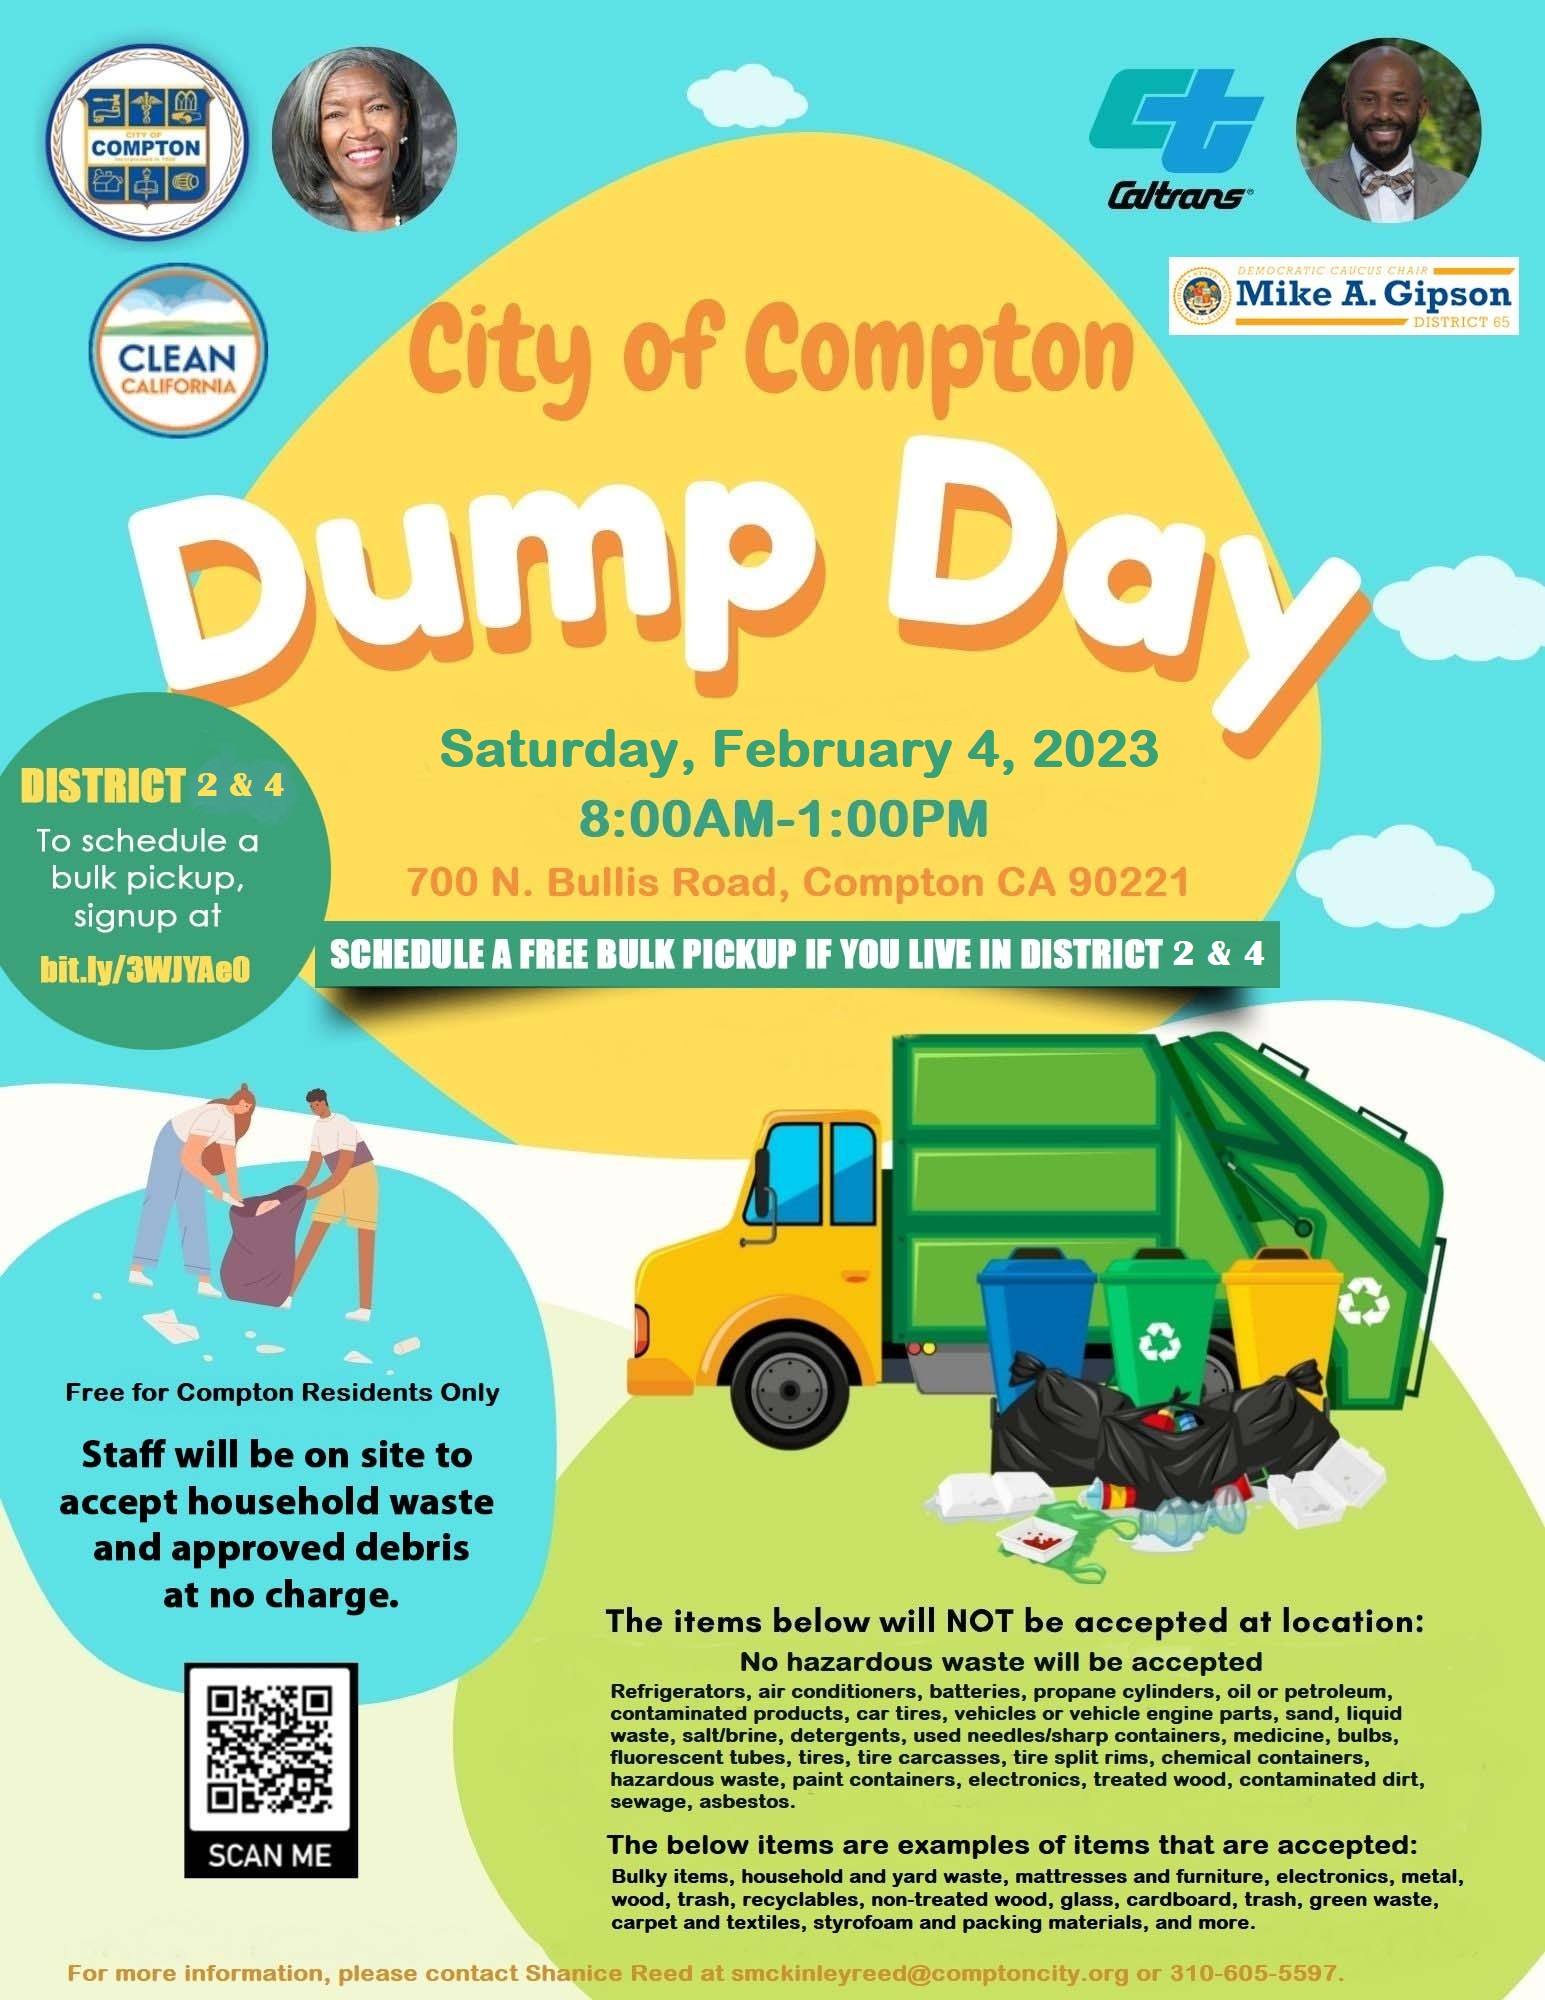 City of Compton Dump Day on Saturday, February 4th from 8:00am-1:00pm. This event is free for all Compton residents.